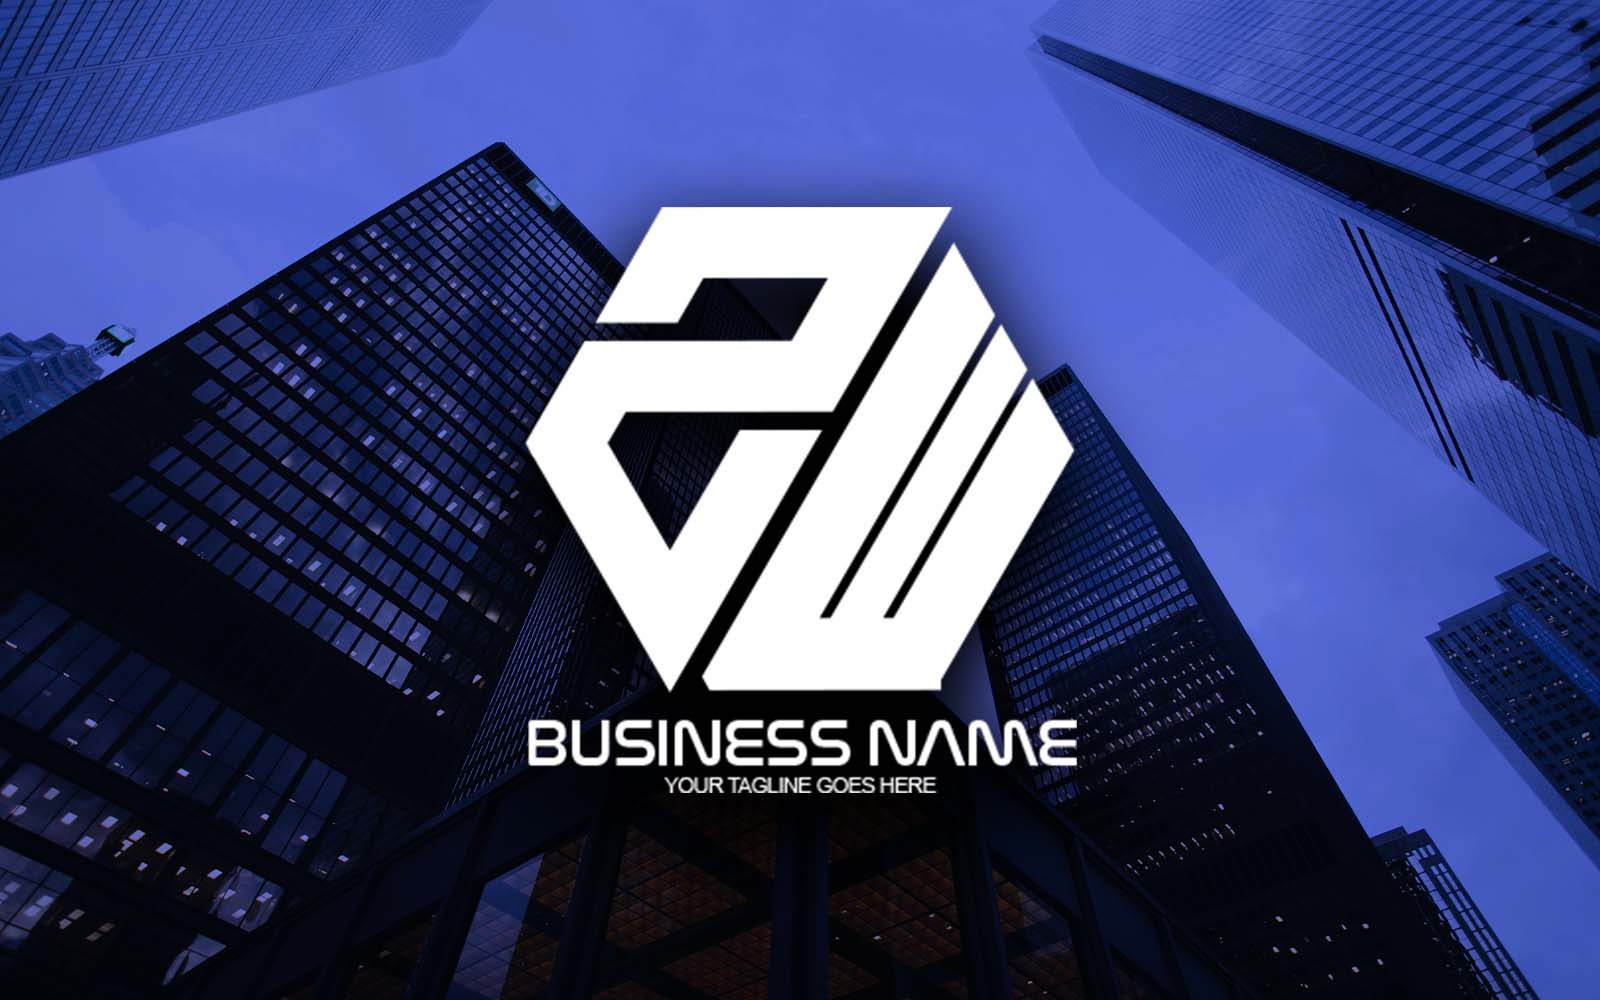 Professional Polygonal ZW Letter Logo Design For Your Business - Brand Identity